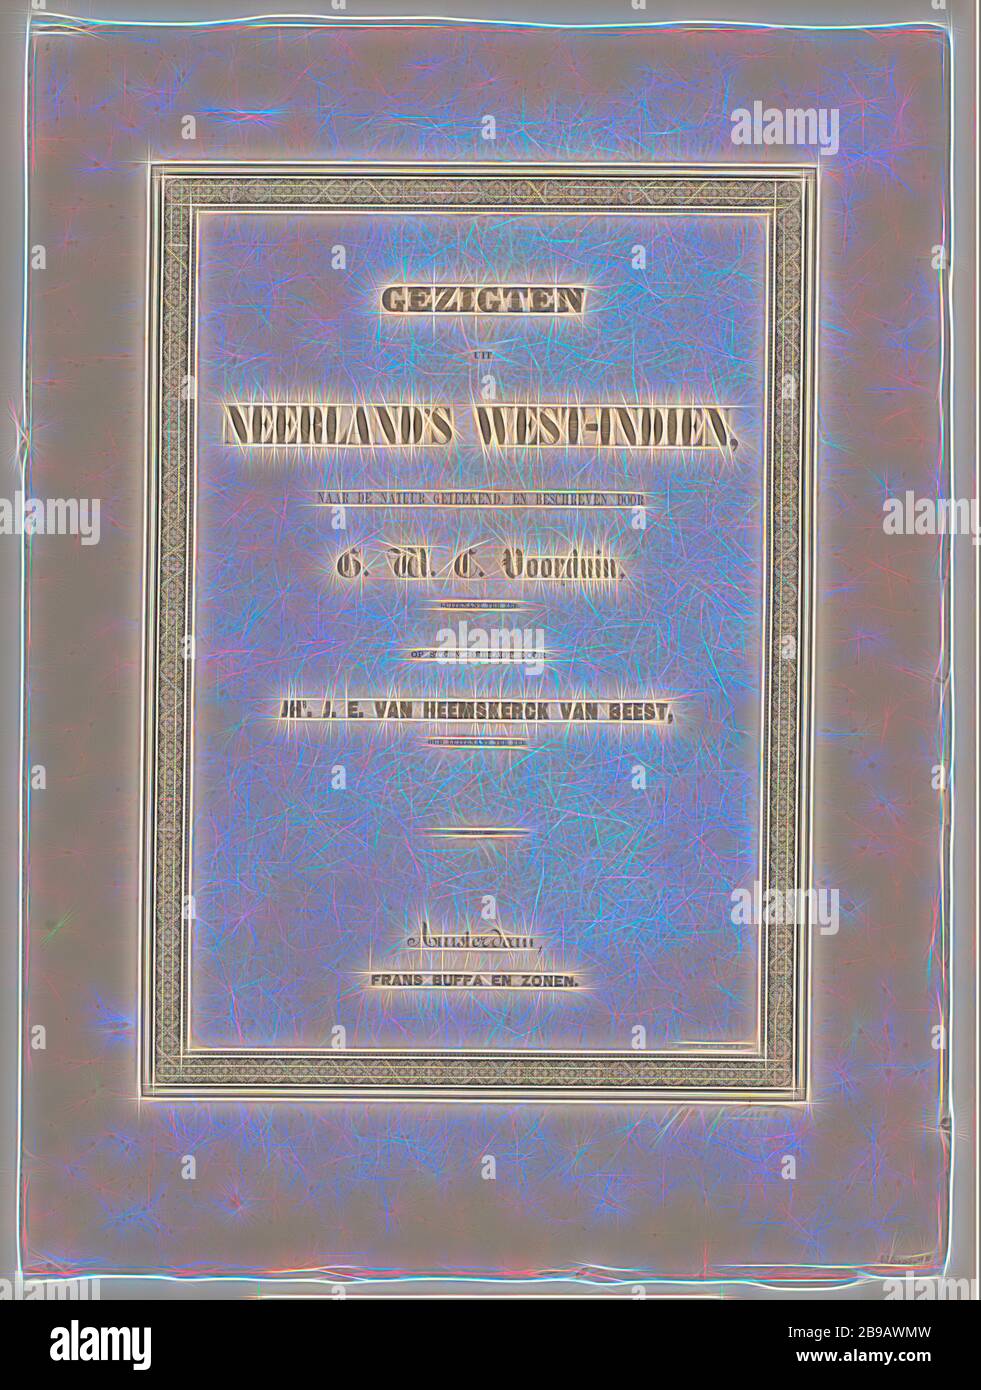 Faces from Neerland's West-Indien (title on object), loose-leaf sheet metal  consisting of four separate folders with identical covers. Folder 1: title  page and six text sheets with introduction and description of plates